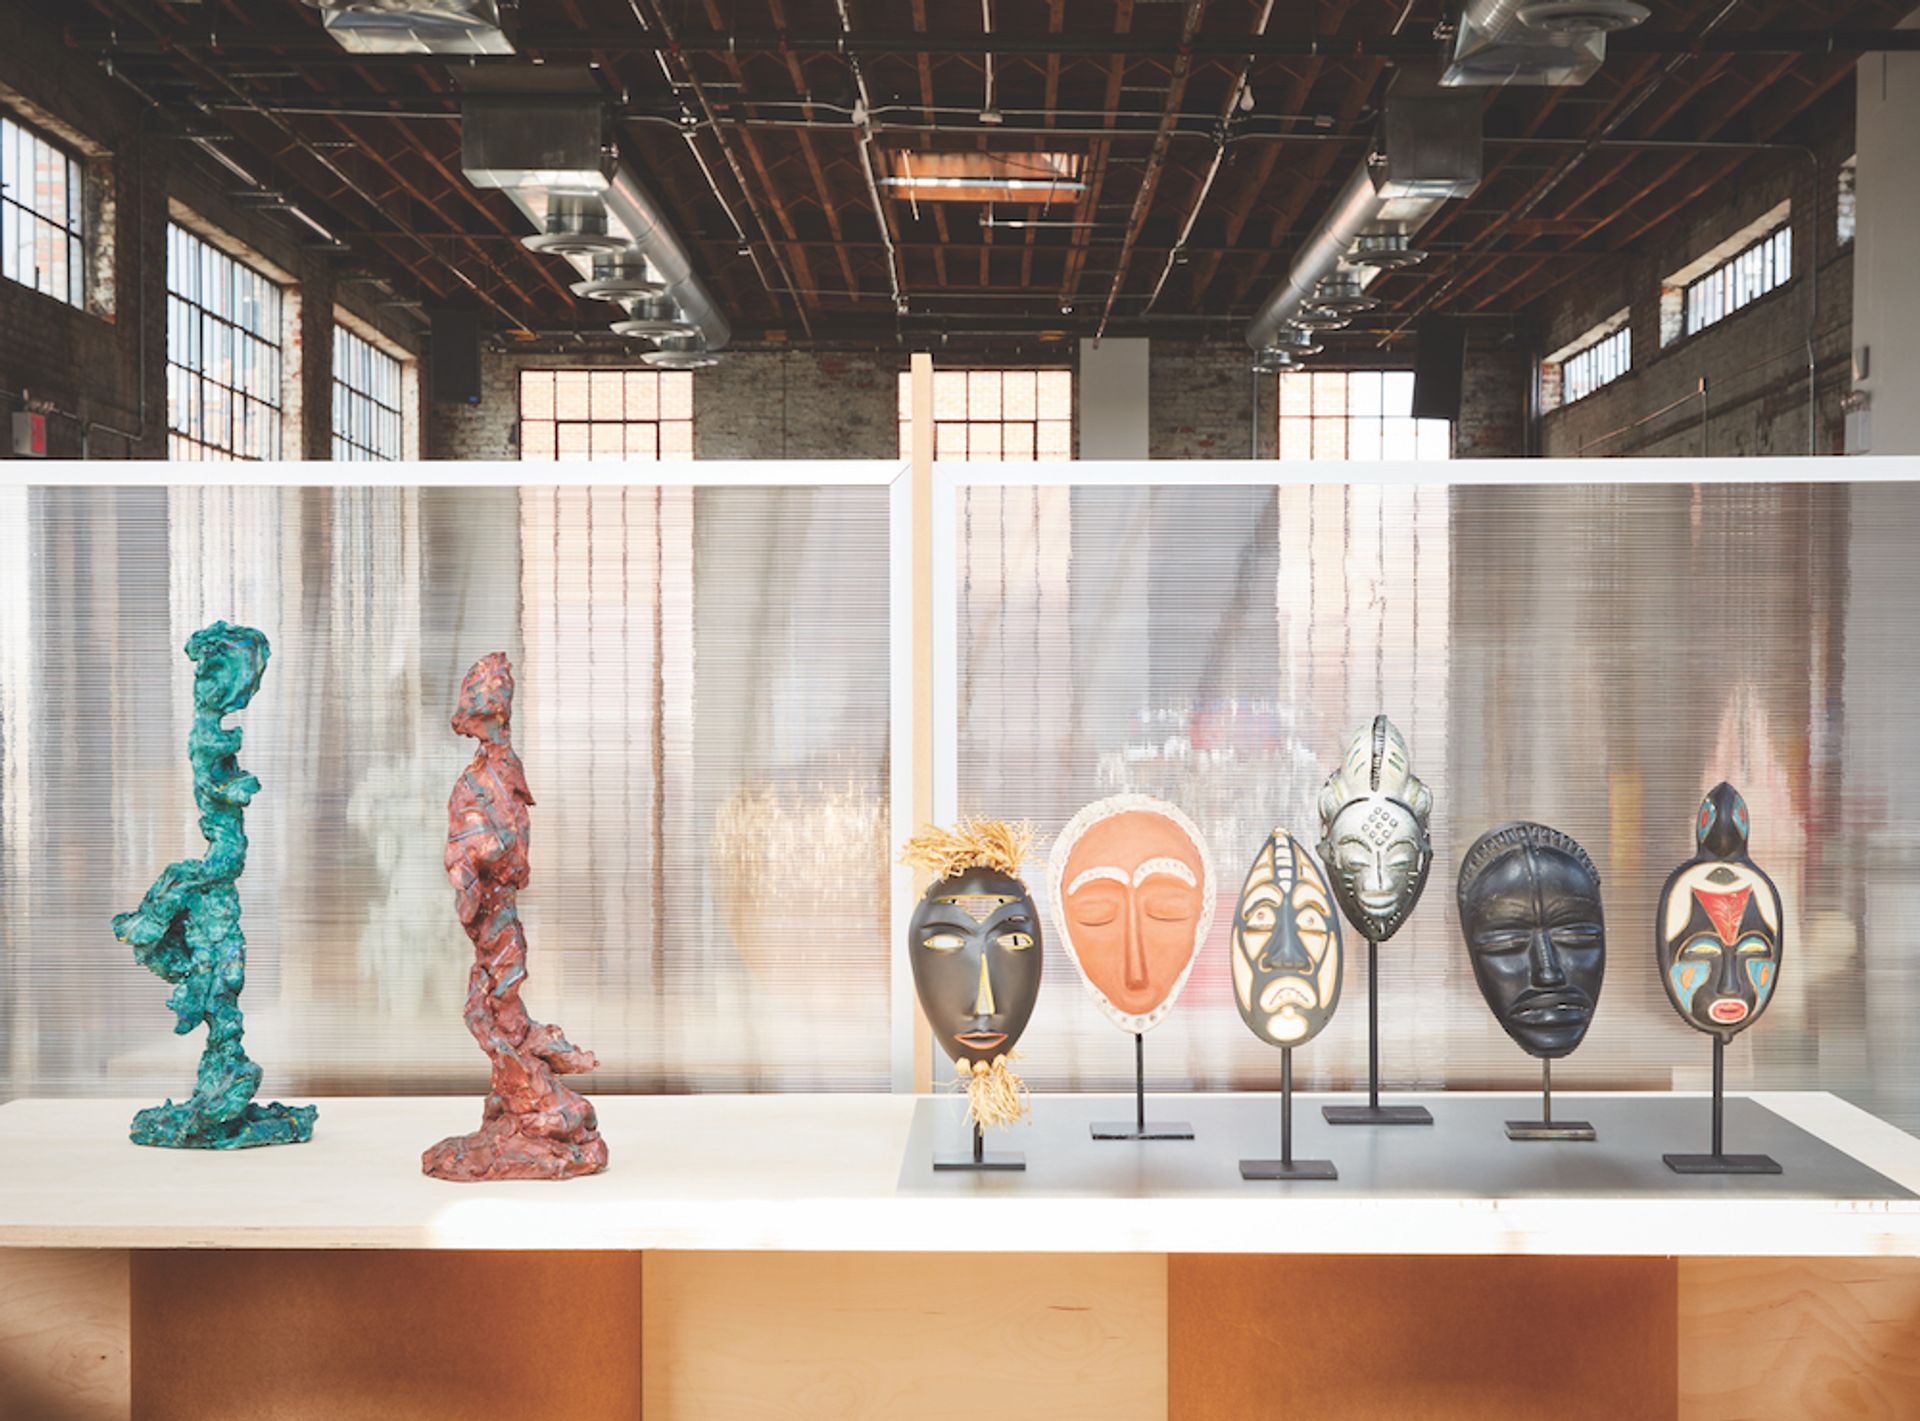 Sculptures by Rebecca Warren shown by Matthew Marks and masks shown by Magen H by Roger Capron, Colette Gueden, Jaque Sagan, and R Weil Object & Thing